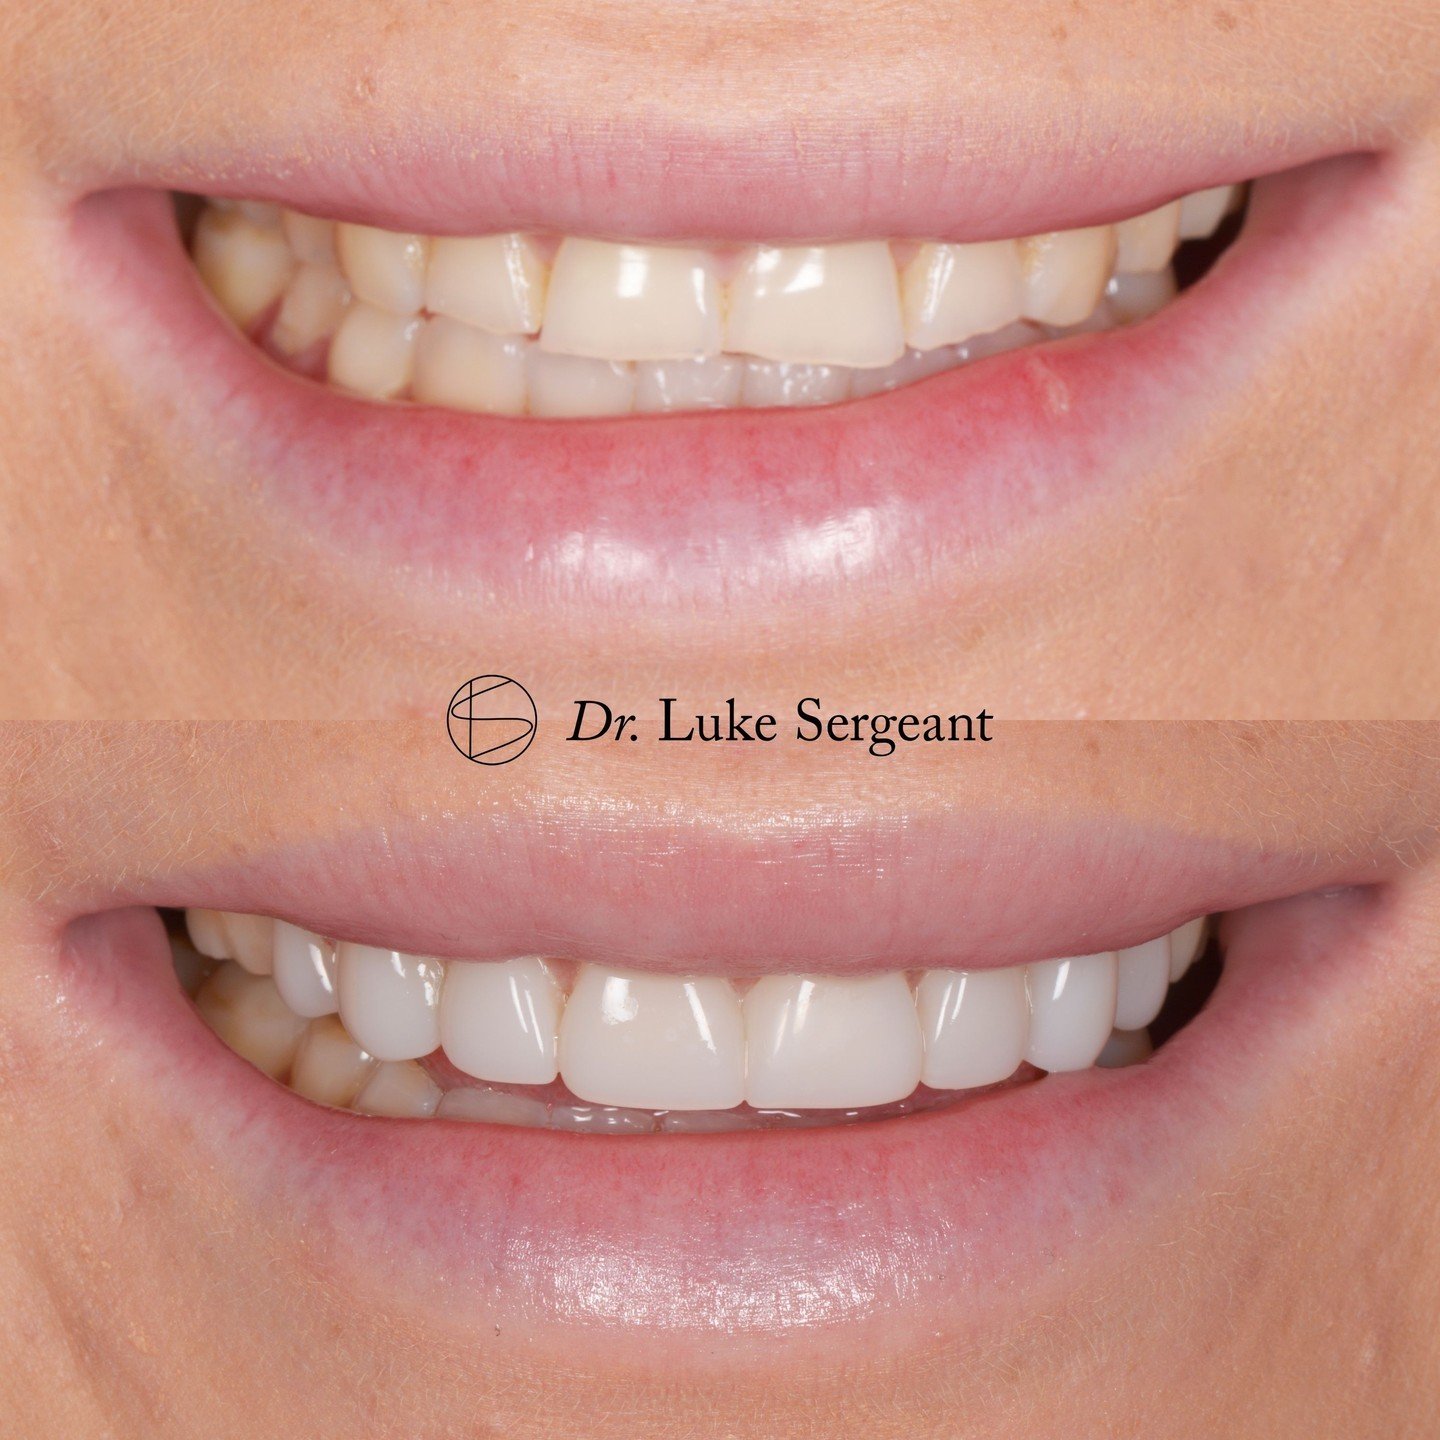 This client had experienced moderate  wear to her upper and lower teeth, leading to a chipped, uneven smile. We first used Invisalign to improve her bite, followed by tooth whitening, and a smile design, before finally restoring her smile with 8x com